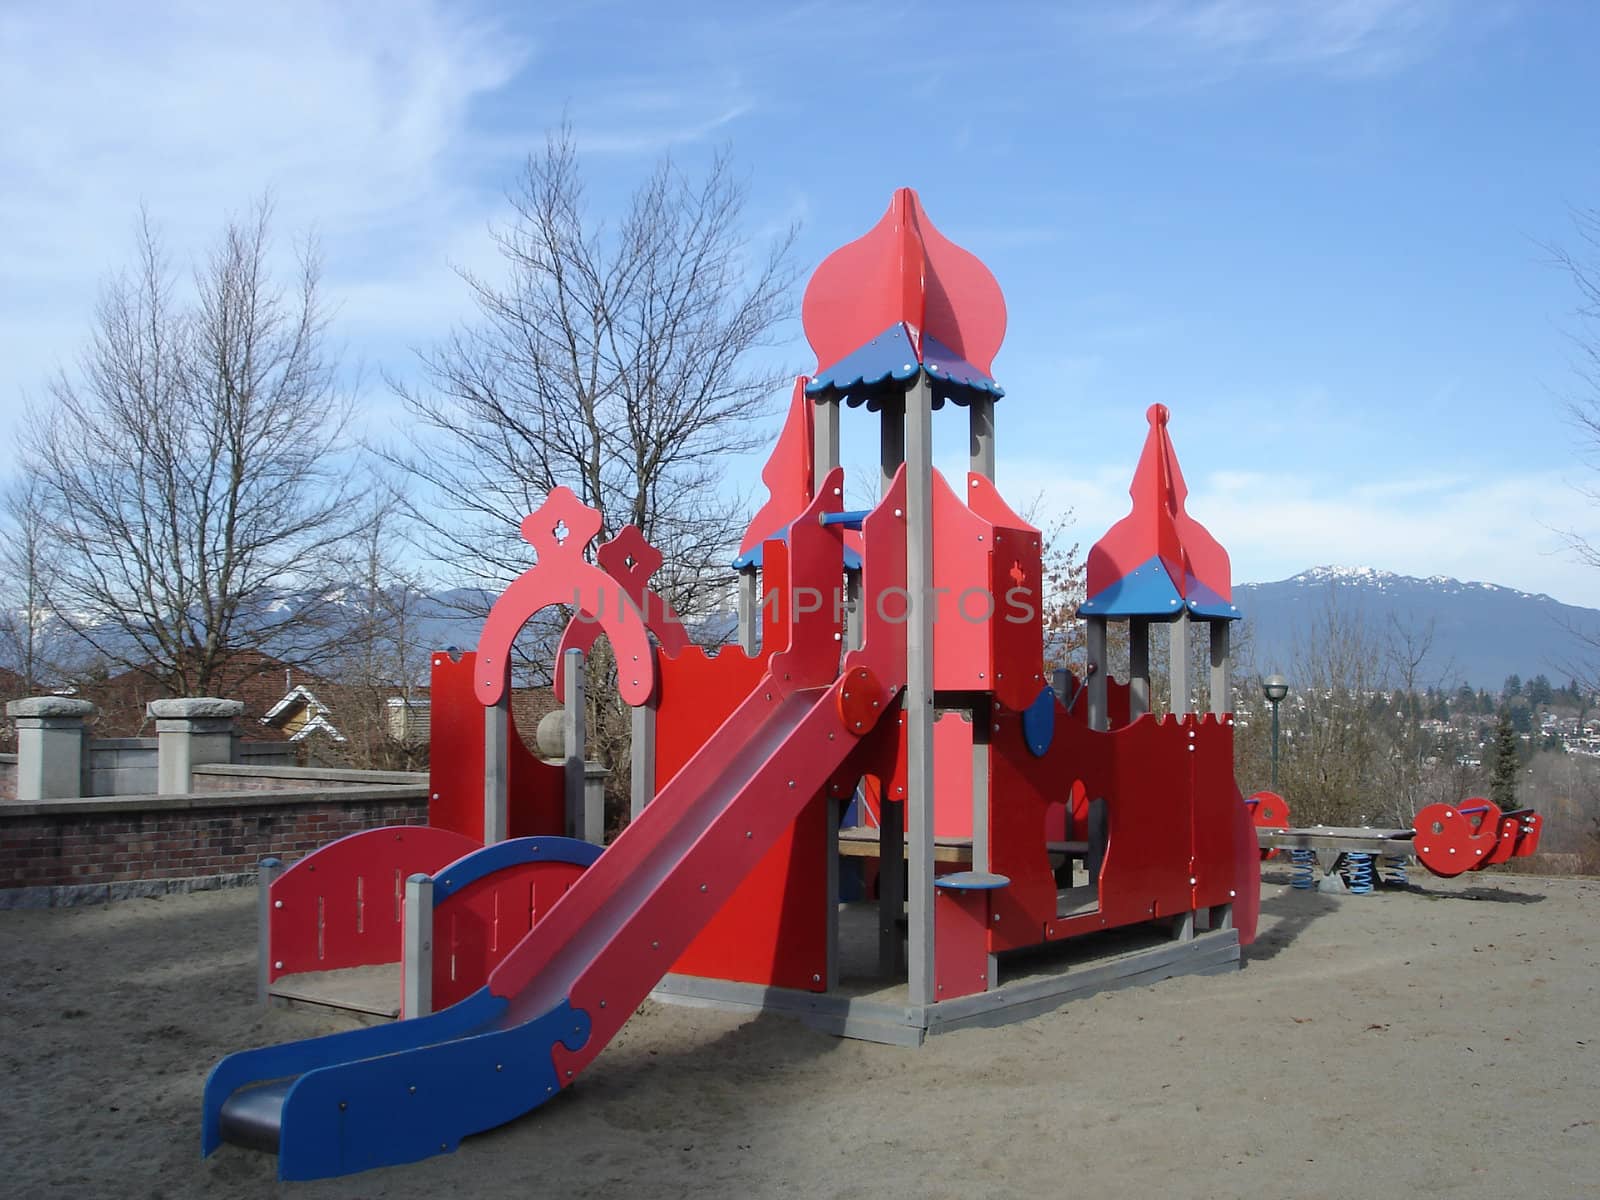 Red Colored Playground In A Park by mmgphoto